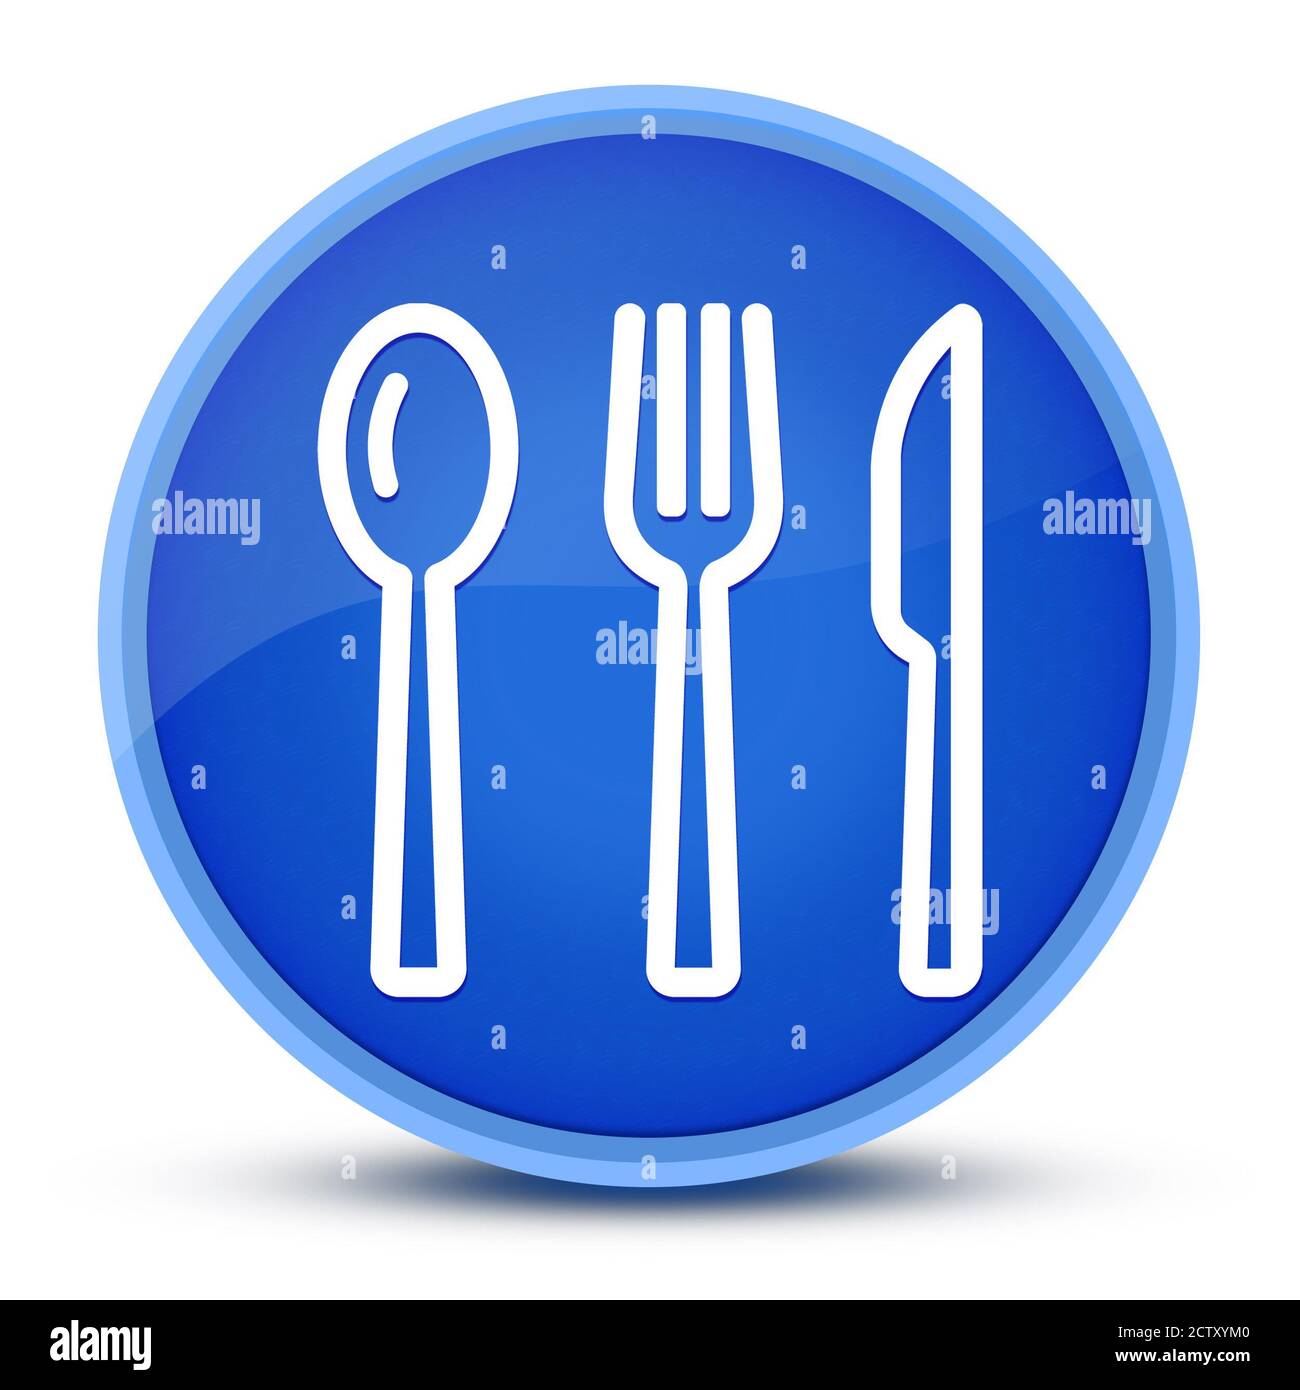 Cutlery luxurious glossy blue round button abstract illustration Stock Photo